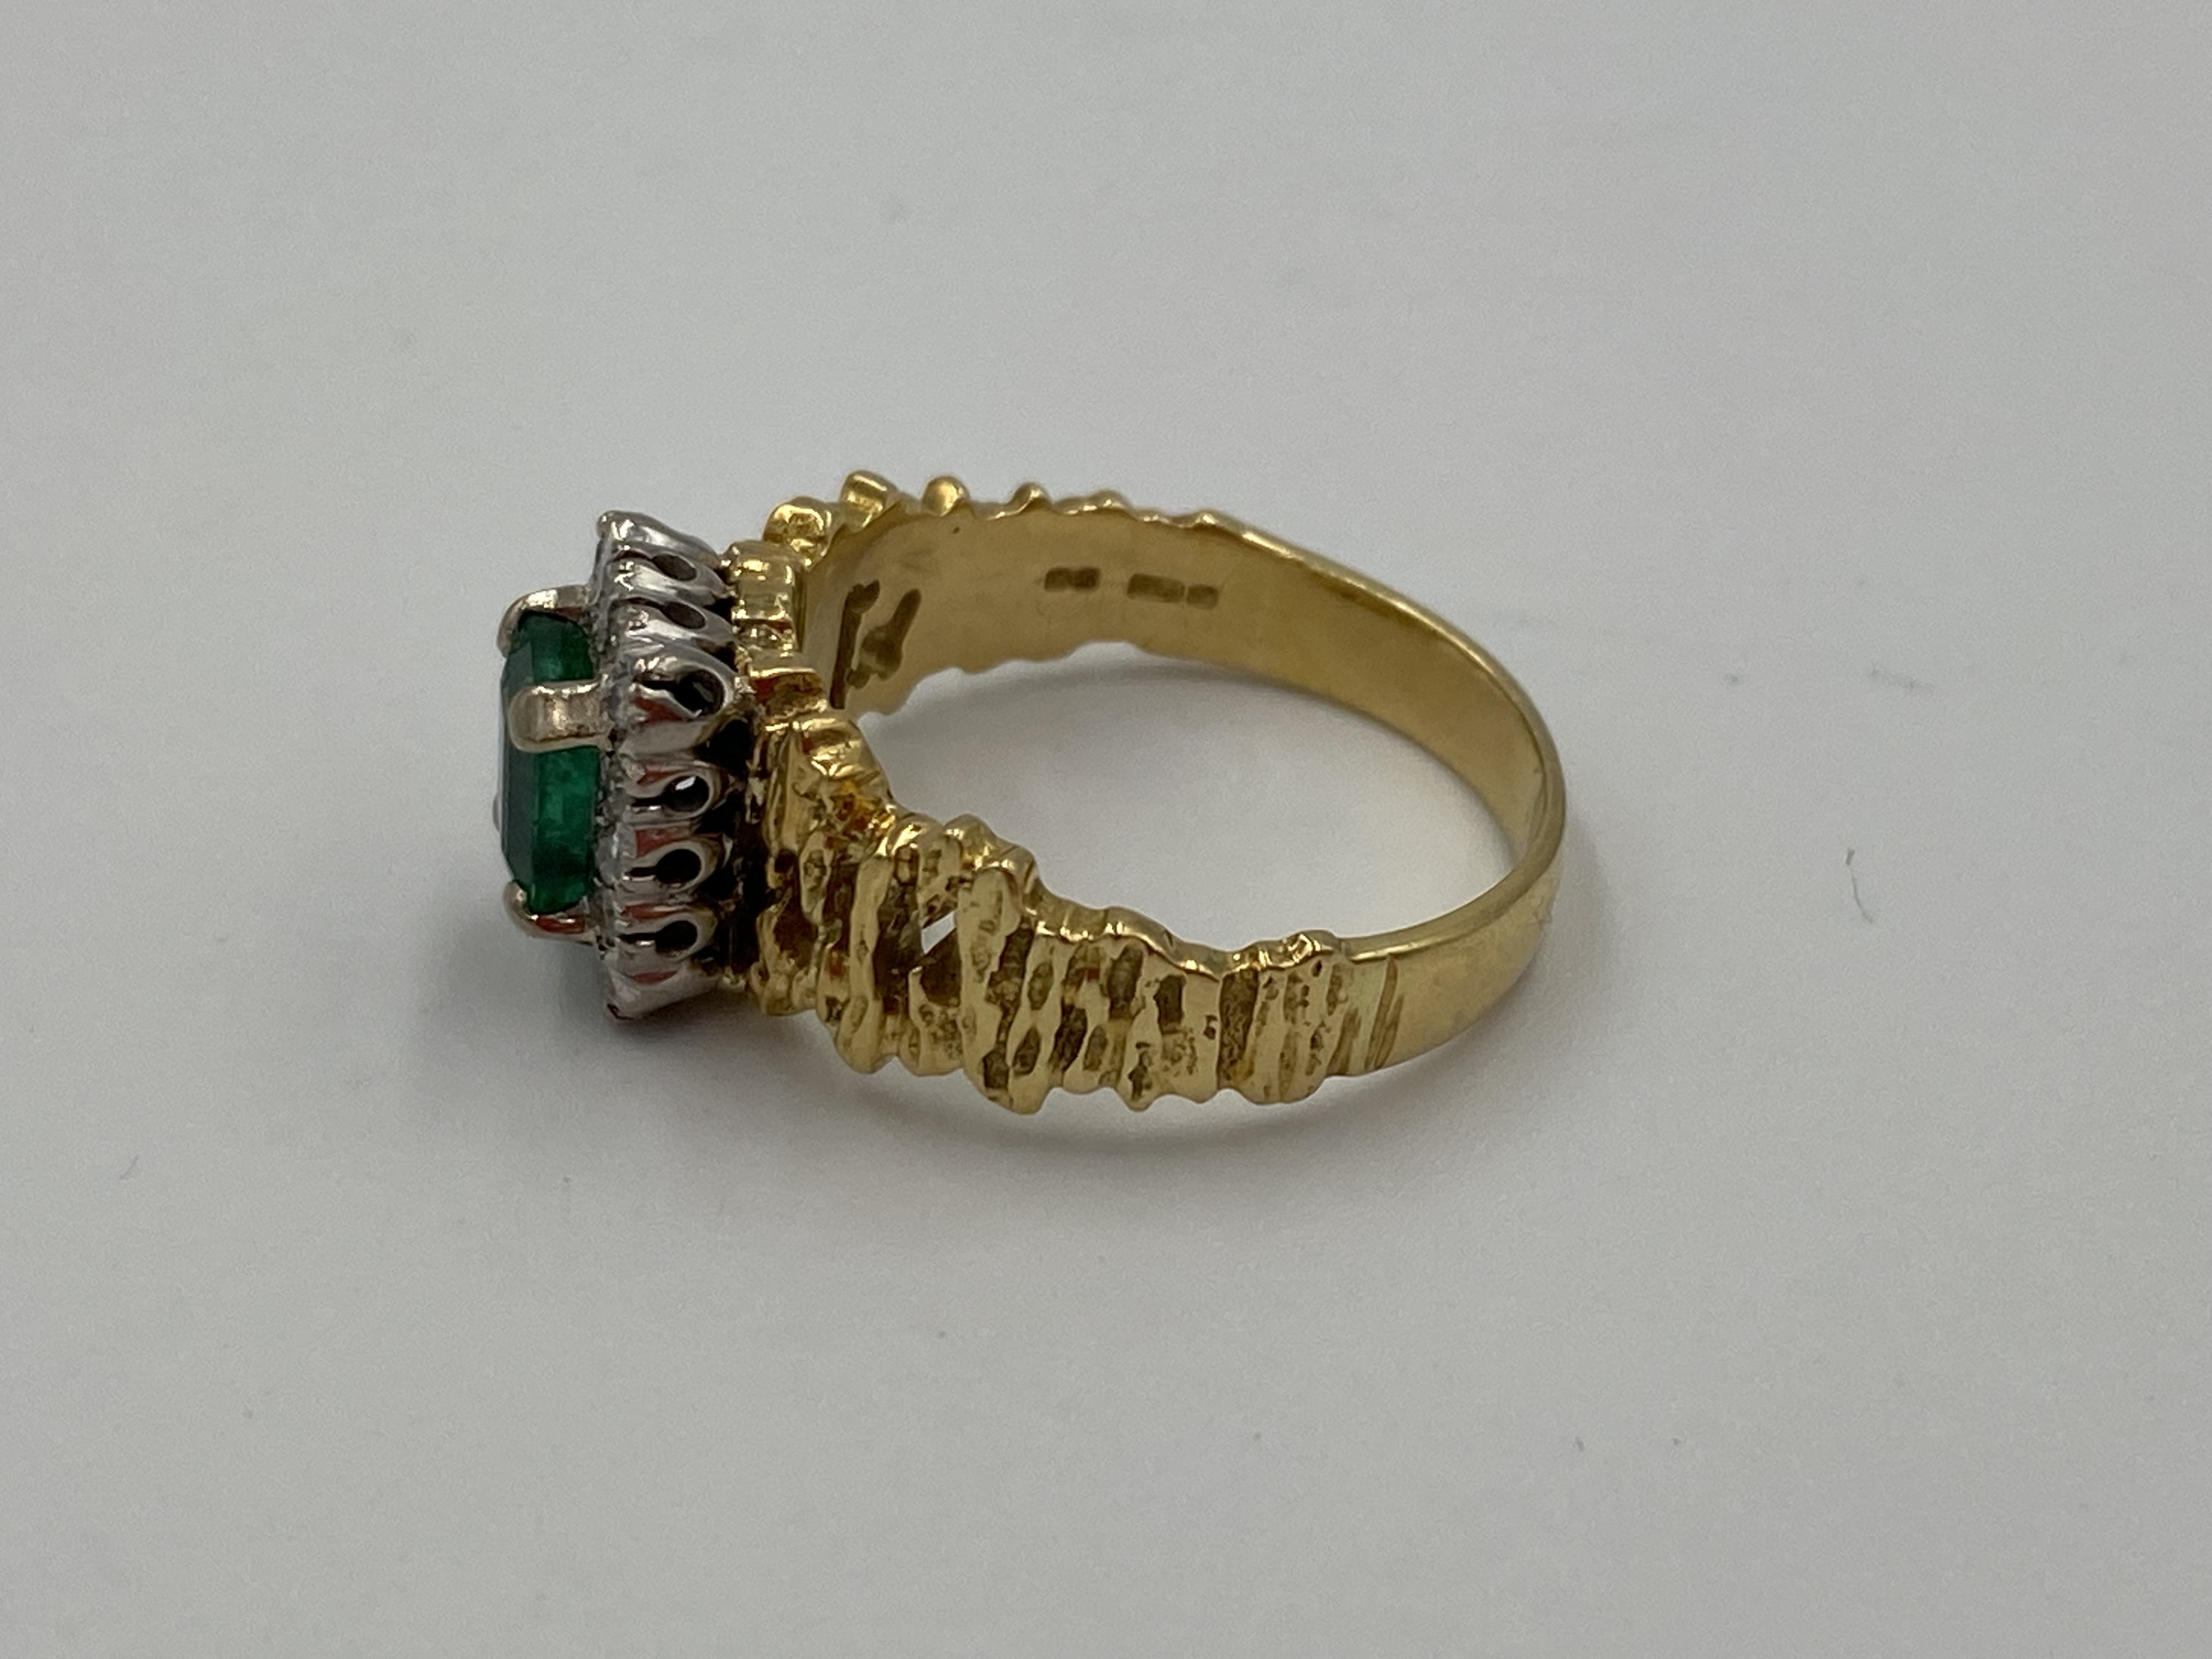 18ct gold, diamond and emerald ring - Image 4 of 6